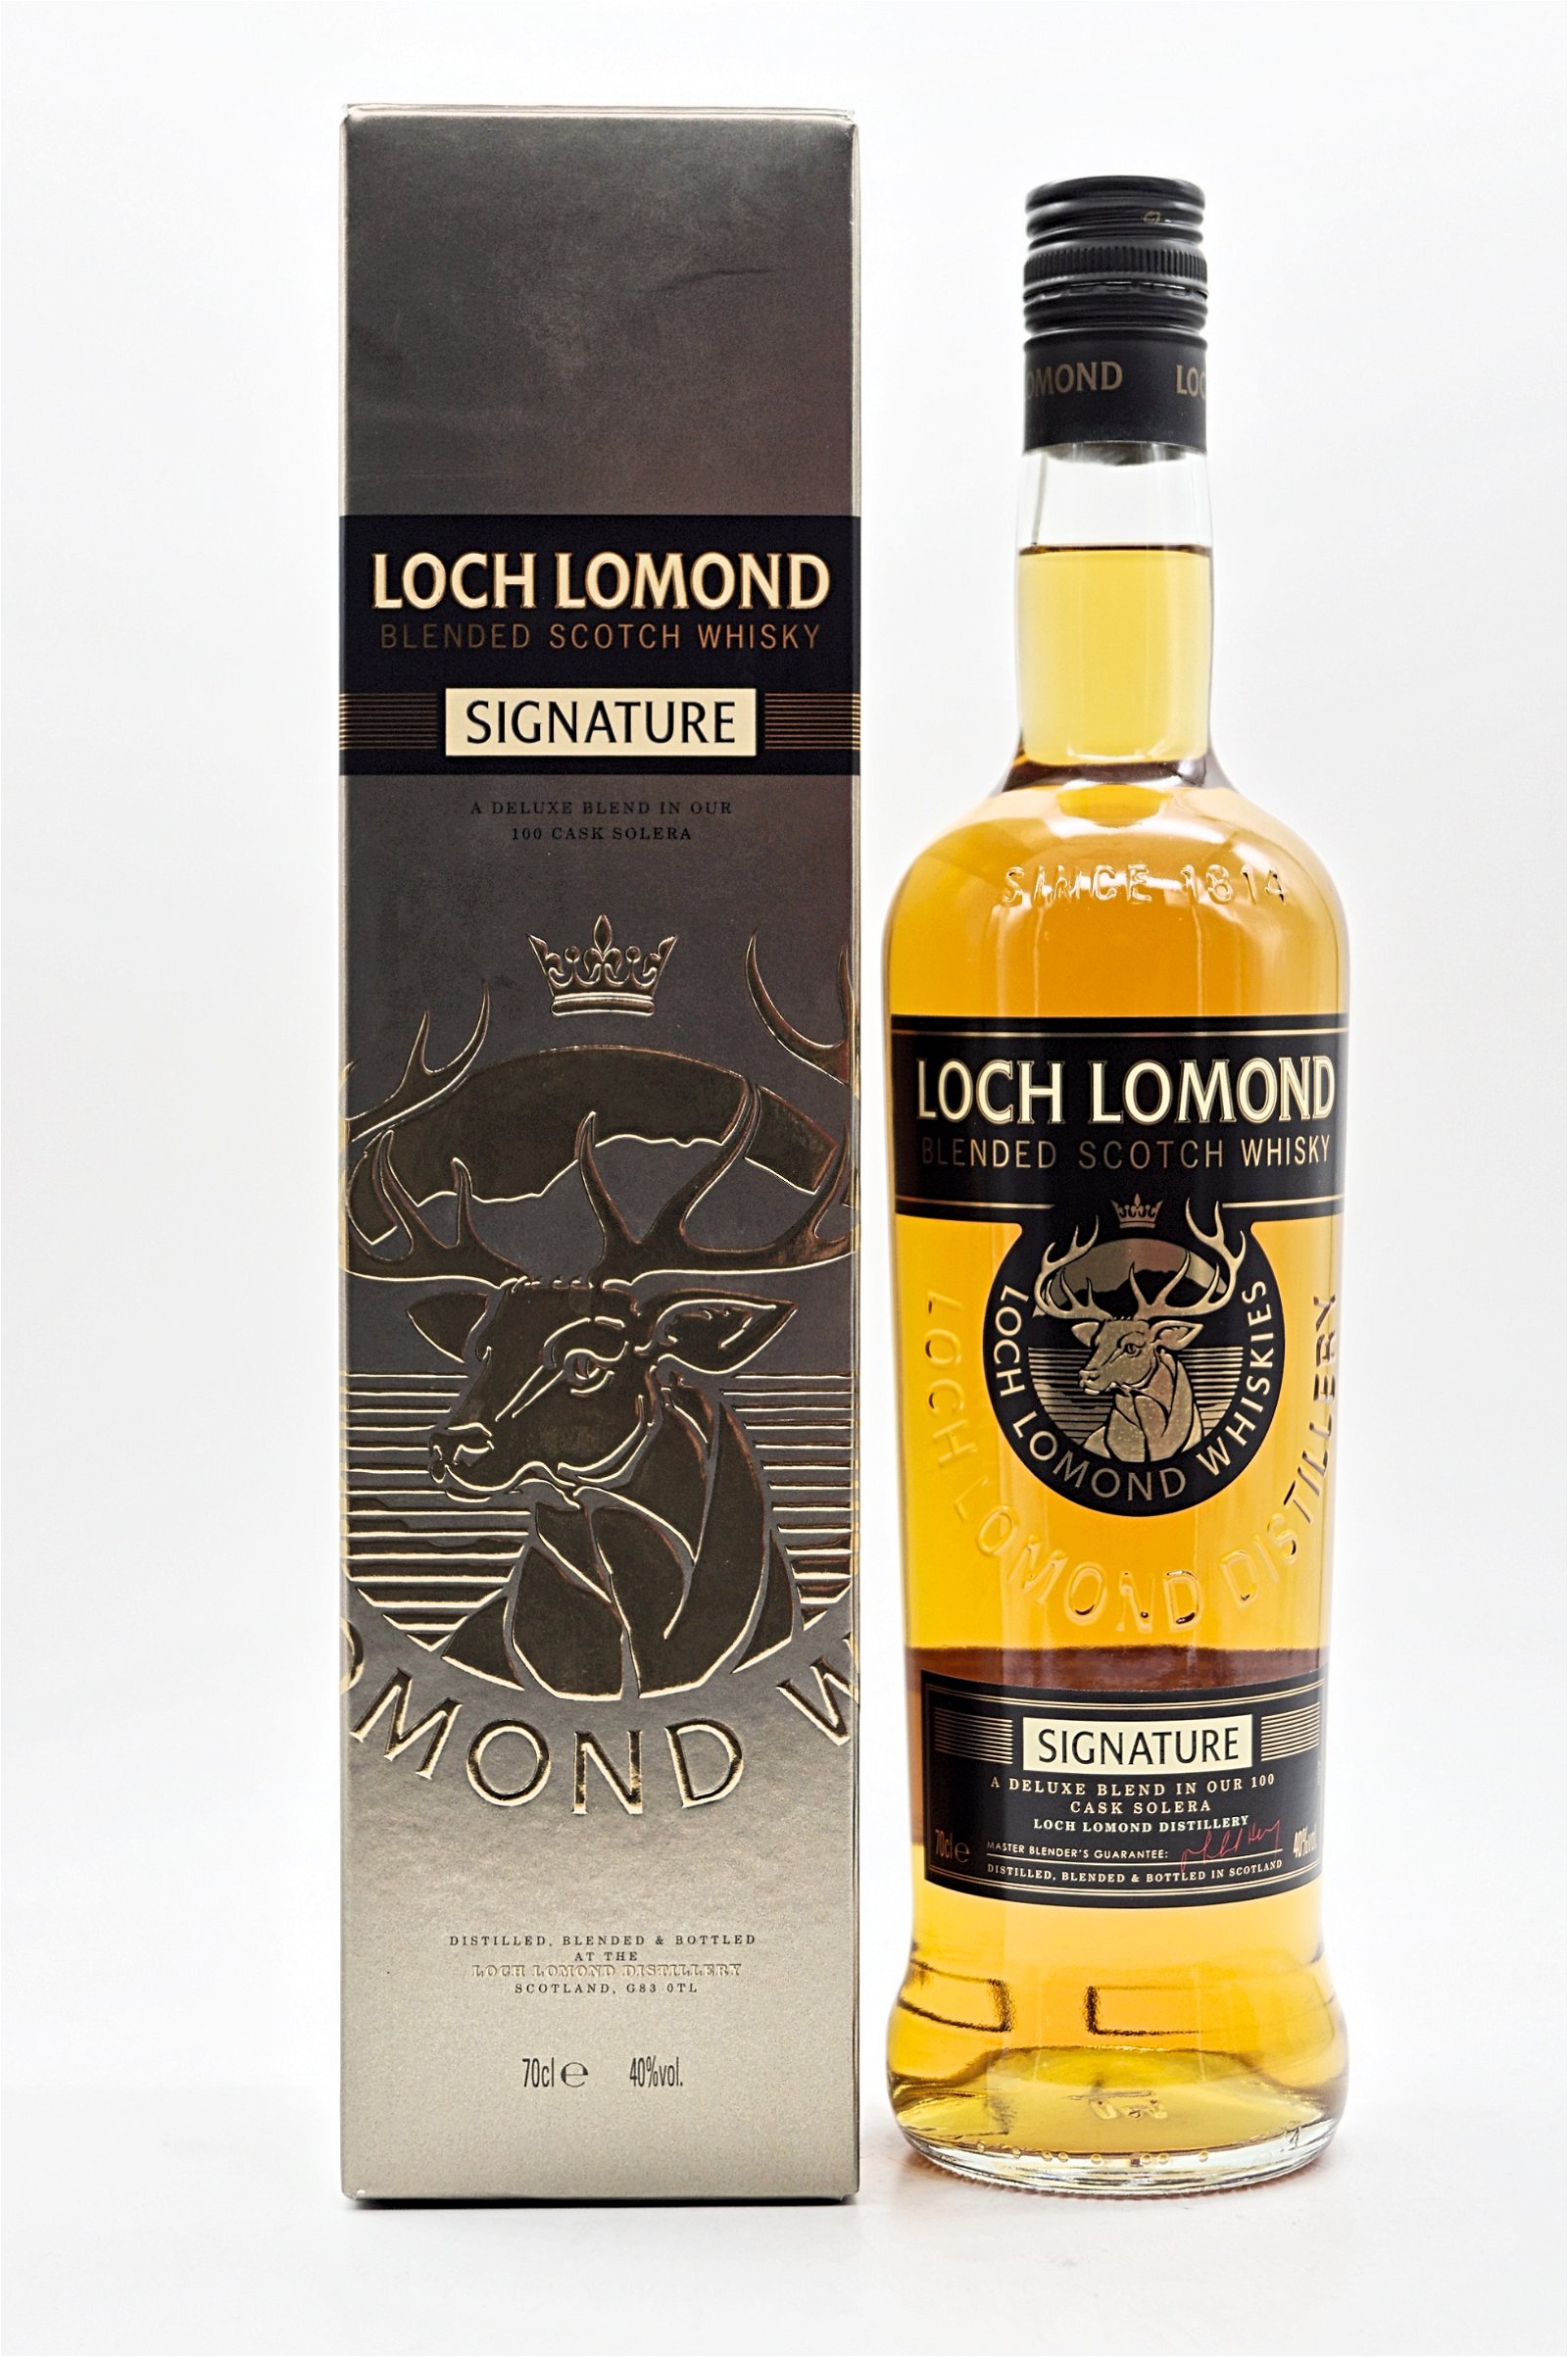 Loch Lomond Whiskies Signature Blended Scotch Whisky